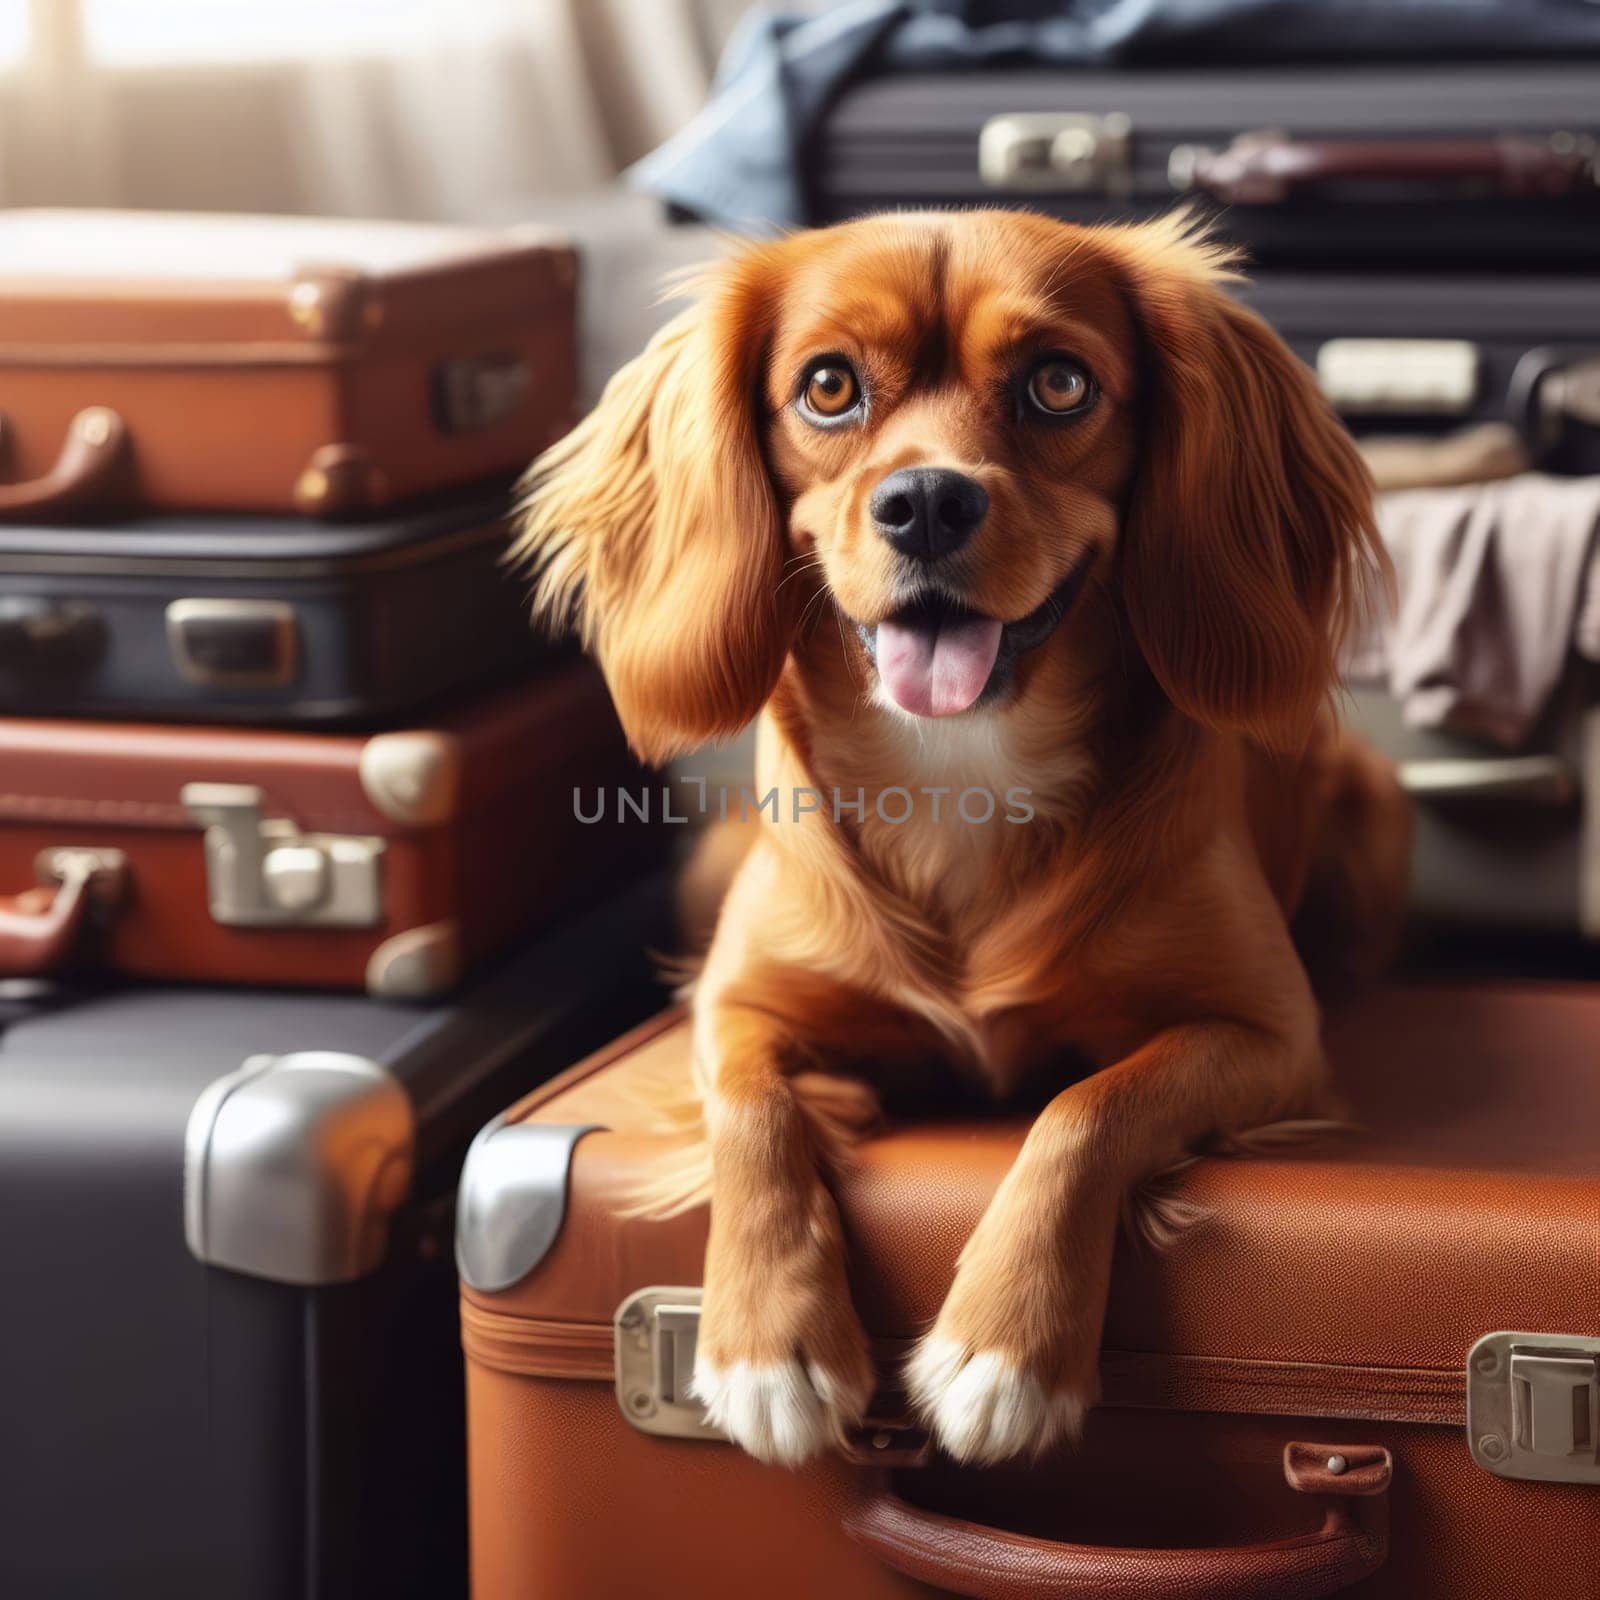 A cute red dog sitting on a suitcase with other luggage in the background